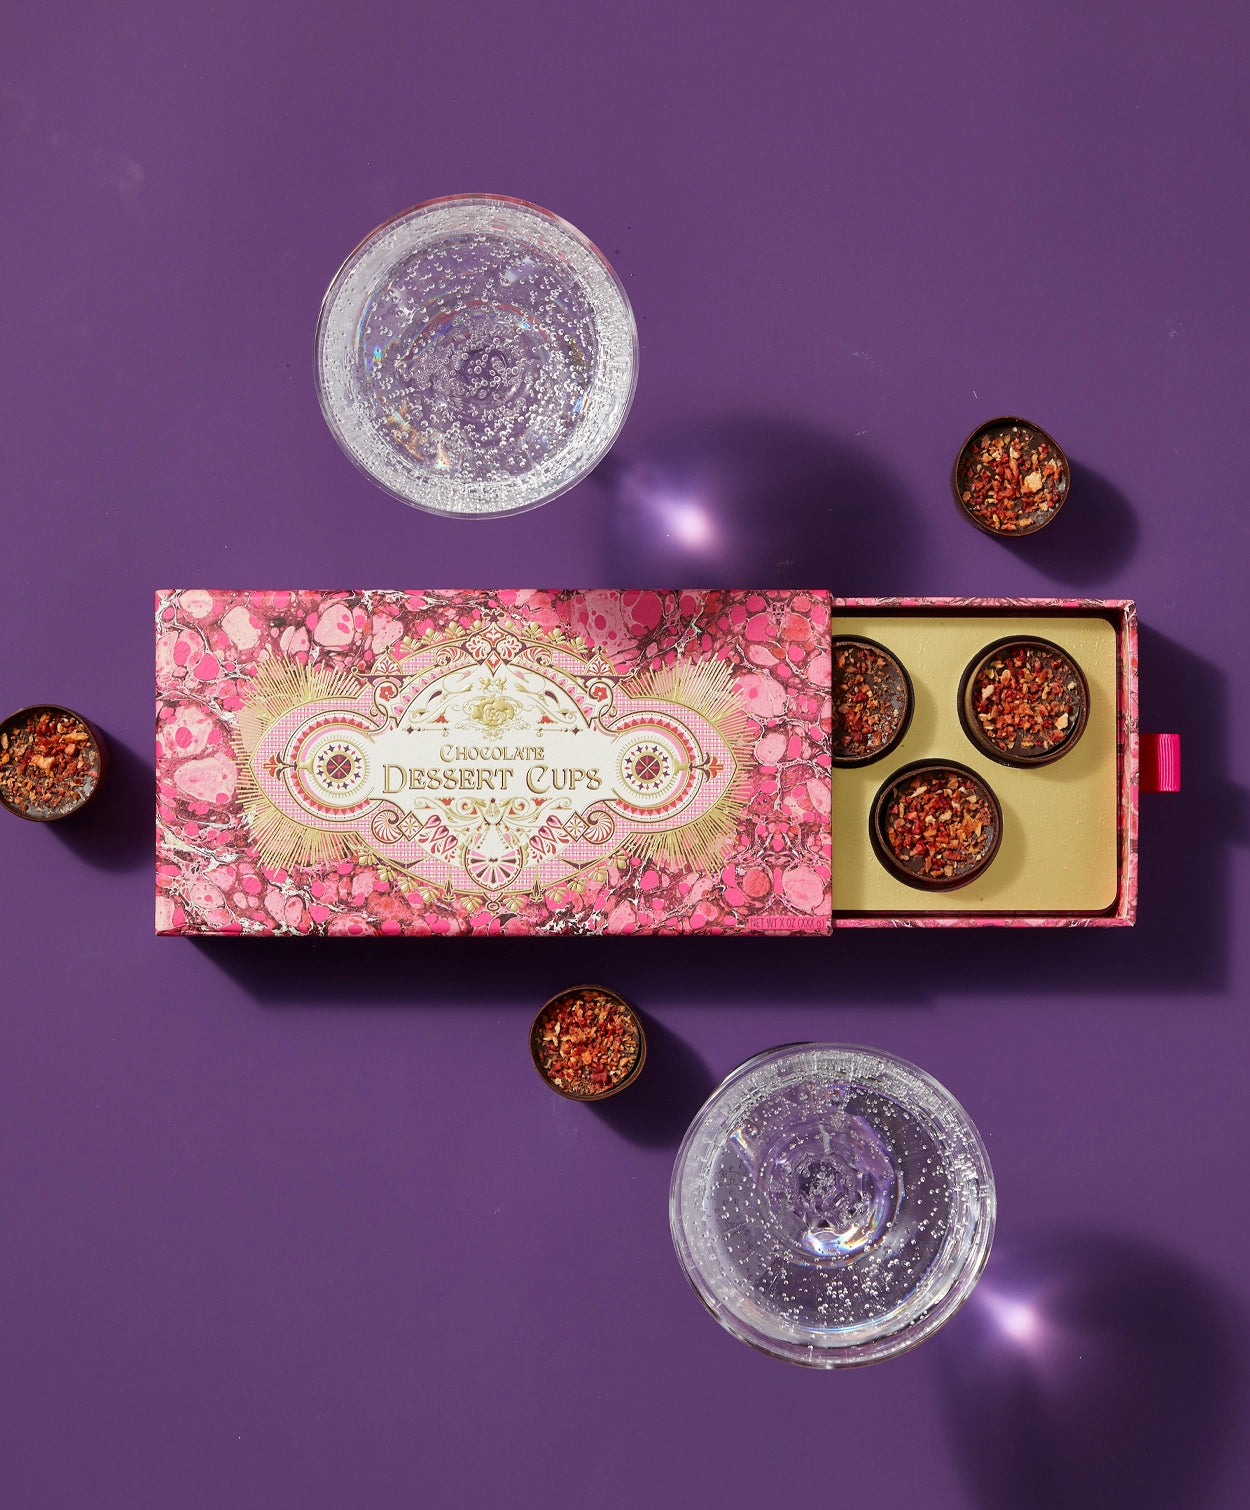 Top down view of a pink and gold Vosges chocolate box partially opened revealing several chocolate champagne dessert cups beside two glasses of bubbly wine on a light purple background.